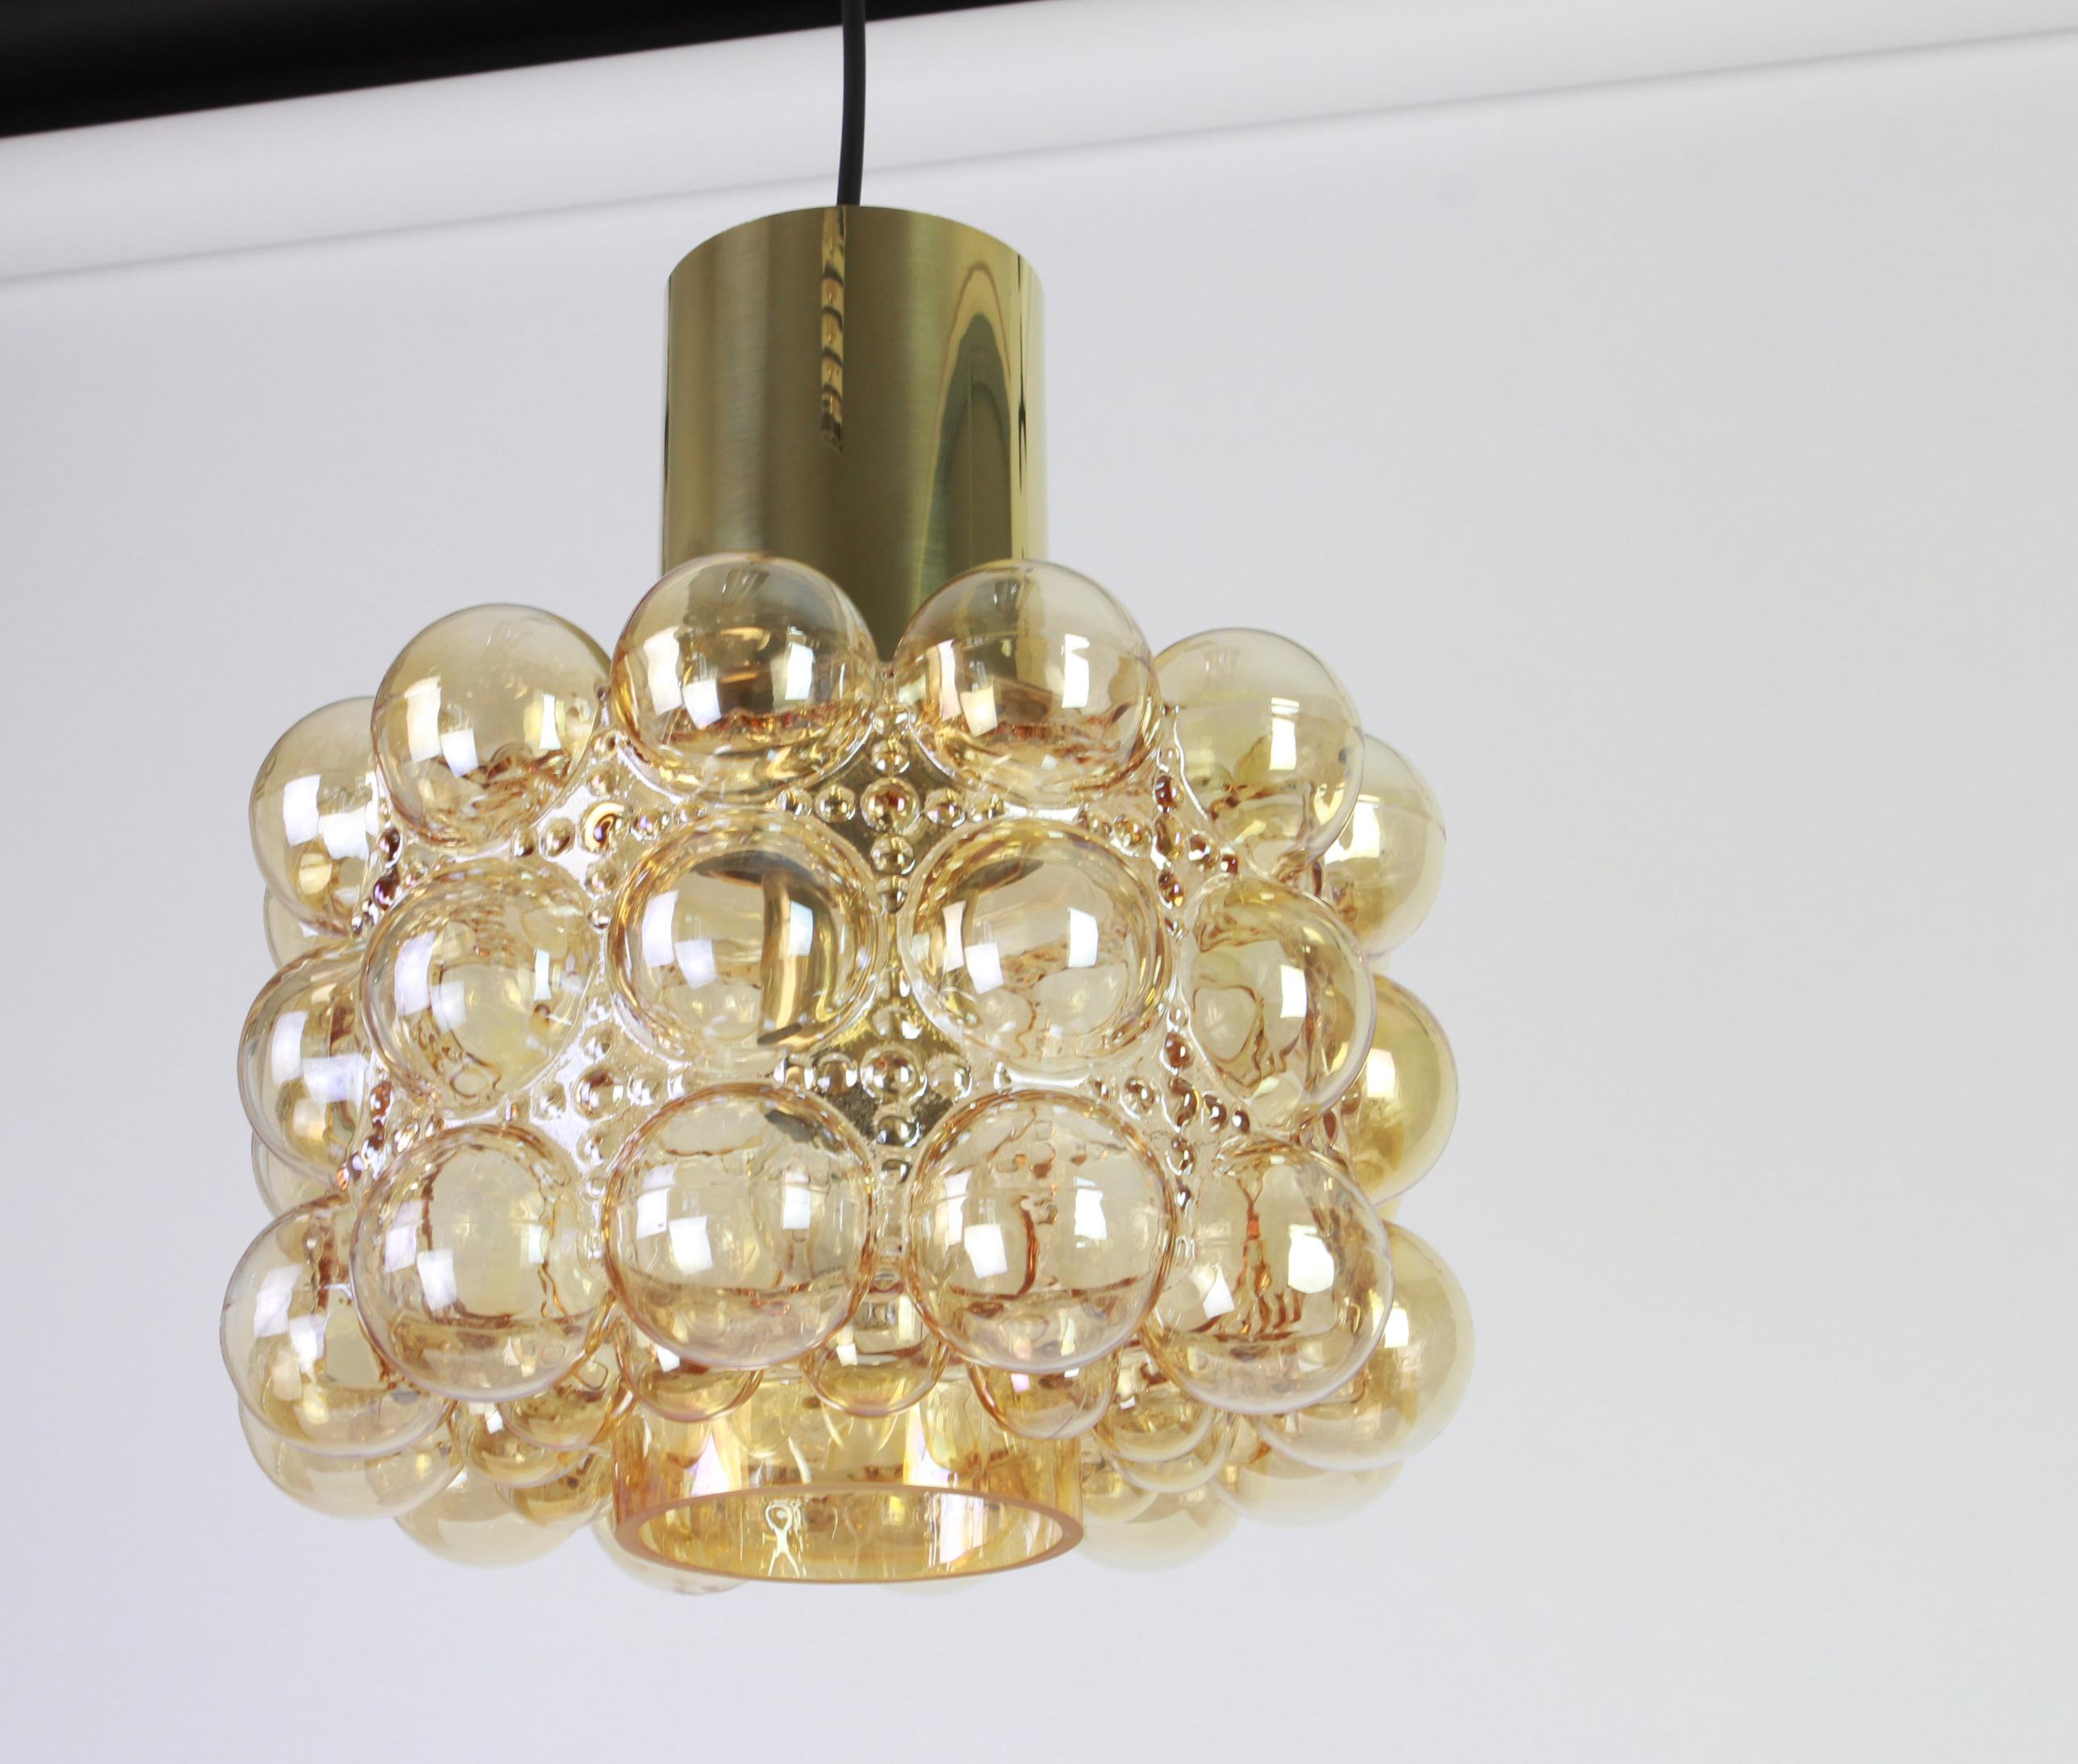 A large round bubble glass pendant designed by Helena Tynell for Limburg, manufactured in Germany, circa 1970s.

Sockets: Needs 1 x E27 standard bulb with 100W max each.
Light bulbs are not included. It is possible to install this fixture in all